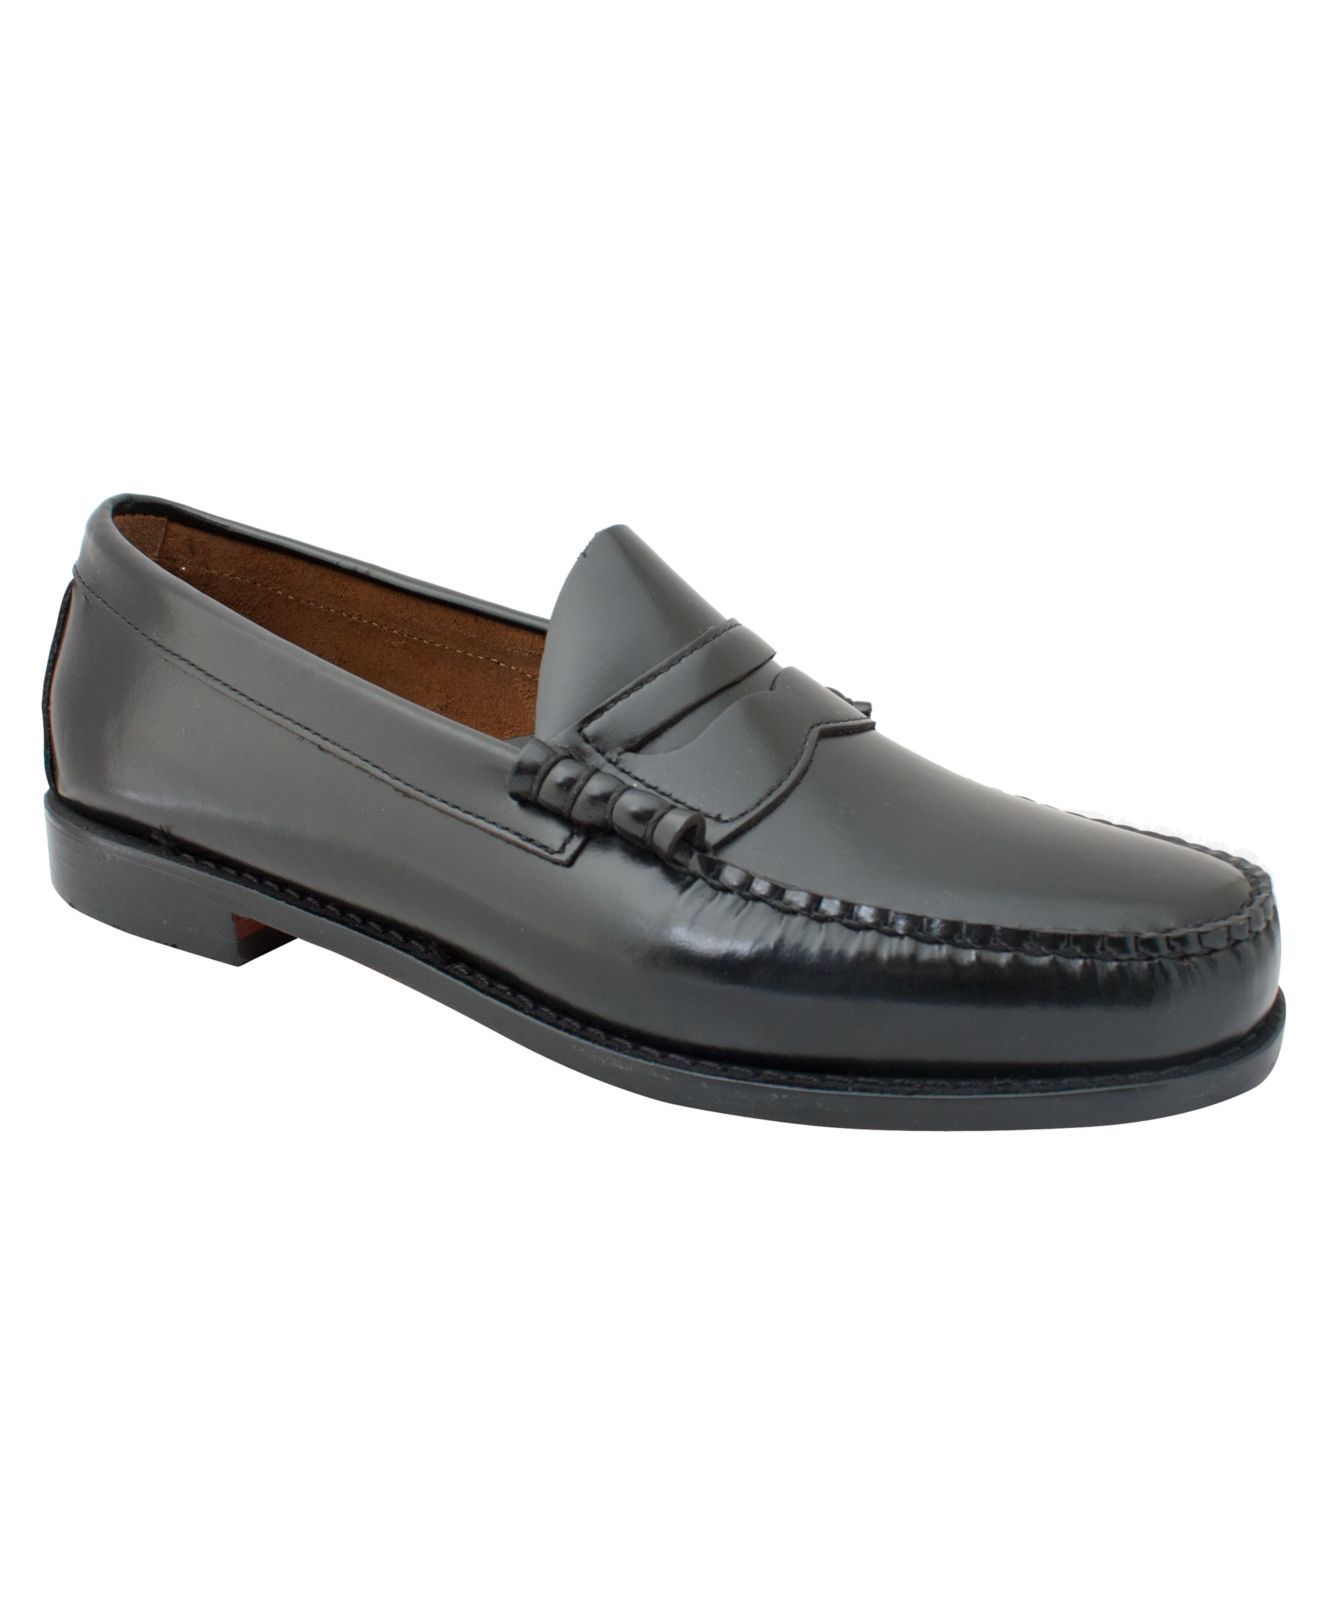 G.h. bass & co. G. H. Bass & Co. Larson Penny Loafers in Black for Men ...